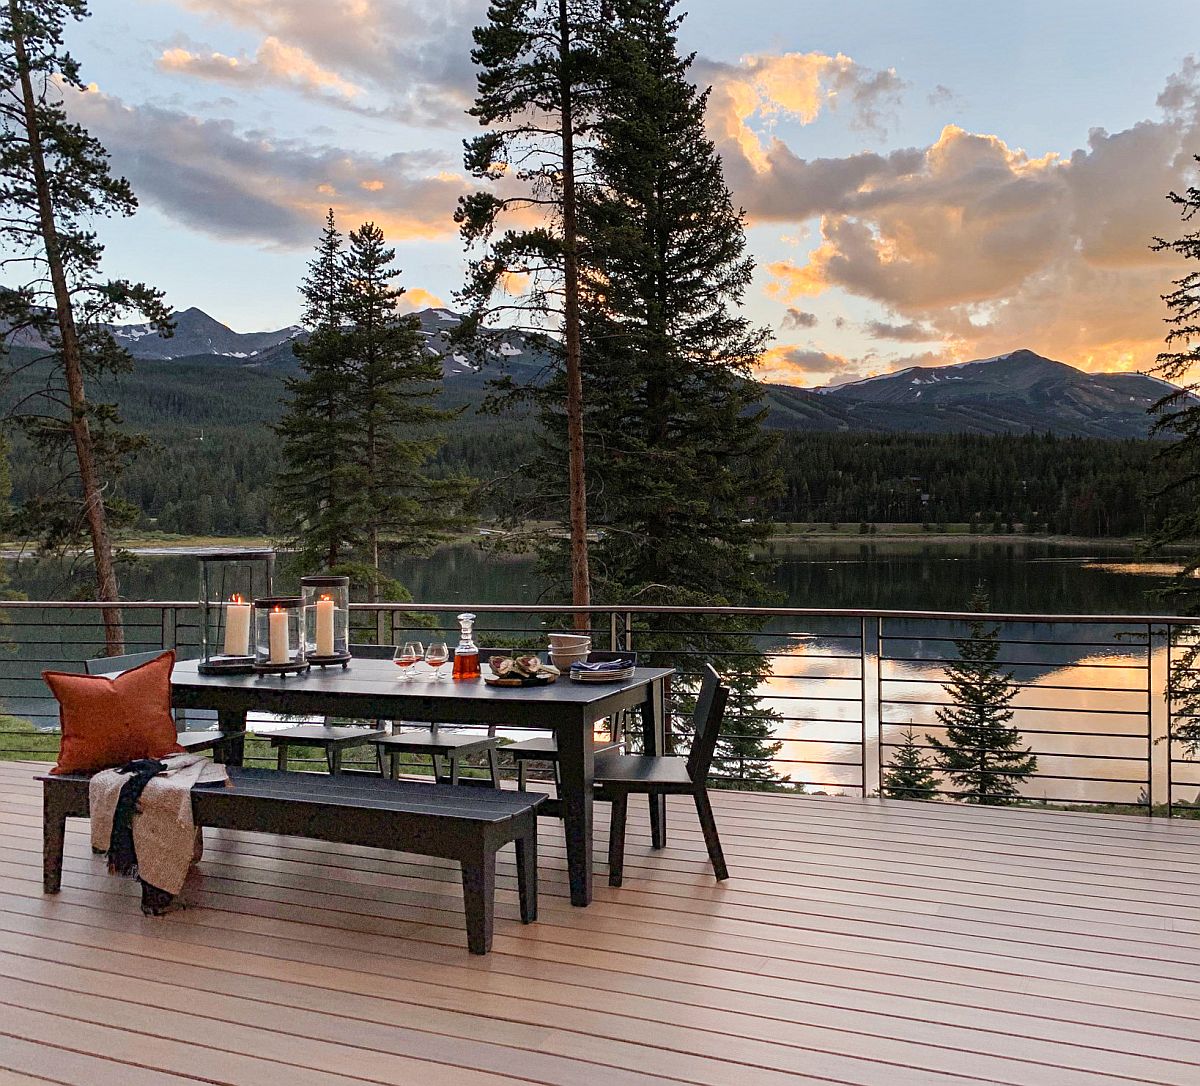 It is the view that steals the show on this lakseside deck